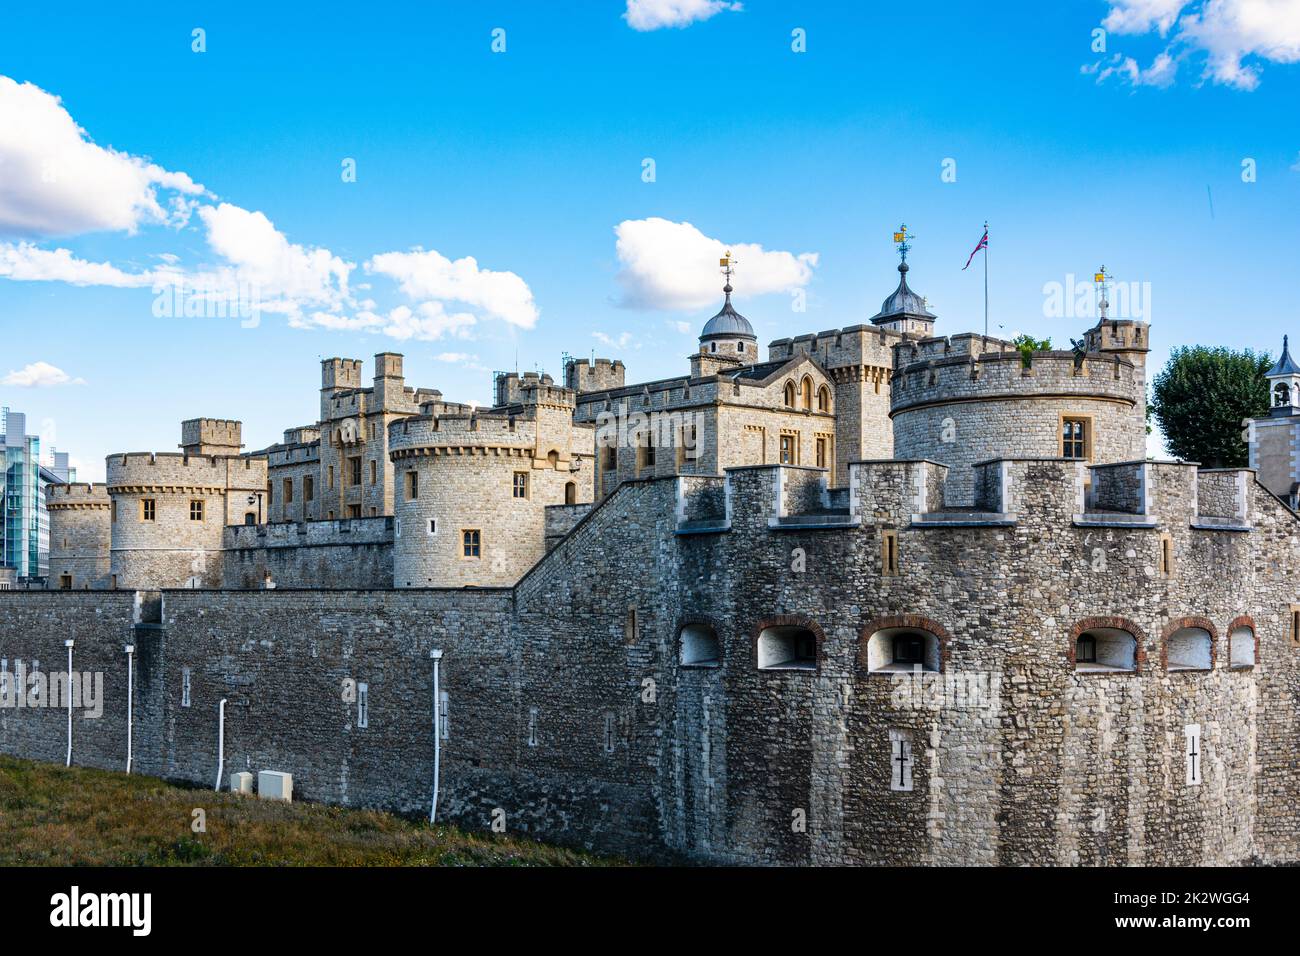 London,England,United Kingdom - August 24, 2022 : View of the Tower of London Stock Photo